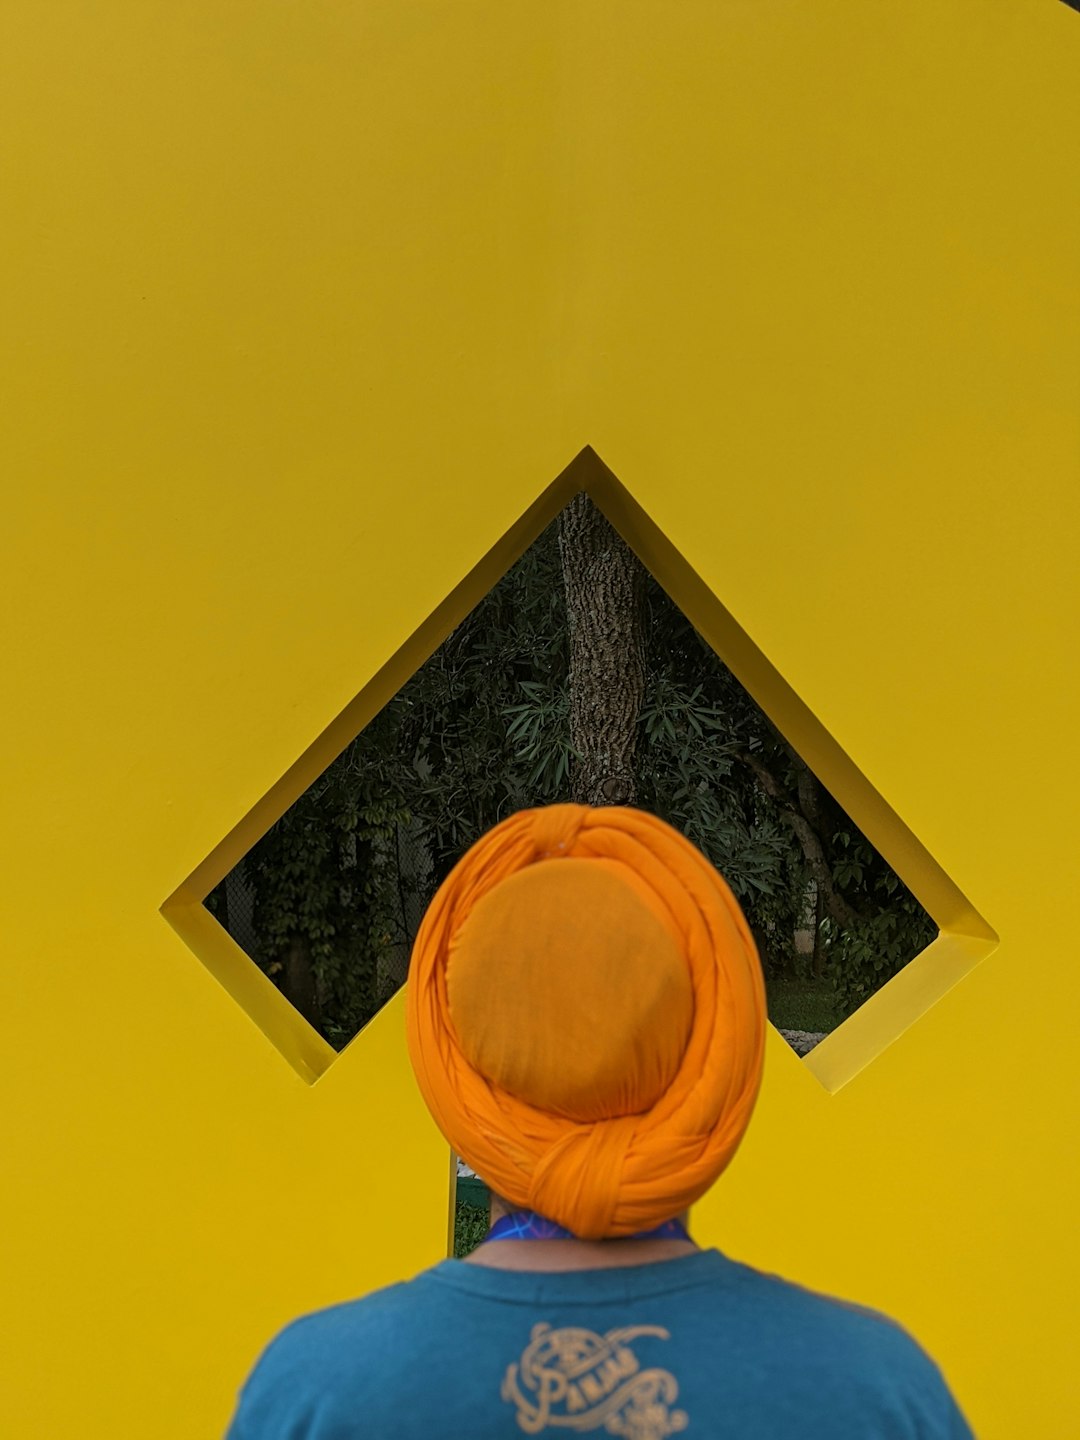 person wearing blue and brown shirt and orange turban hat standing while facing back